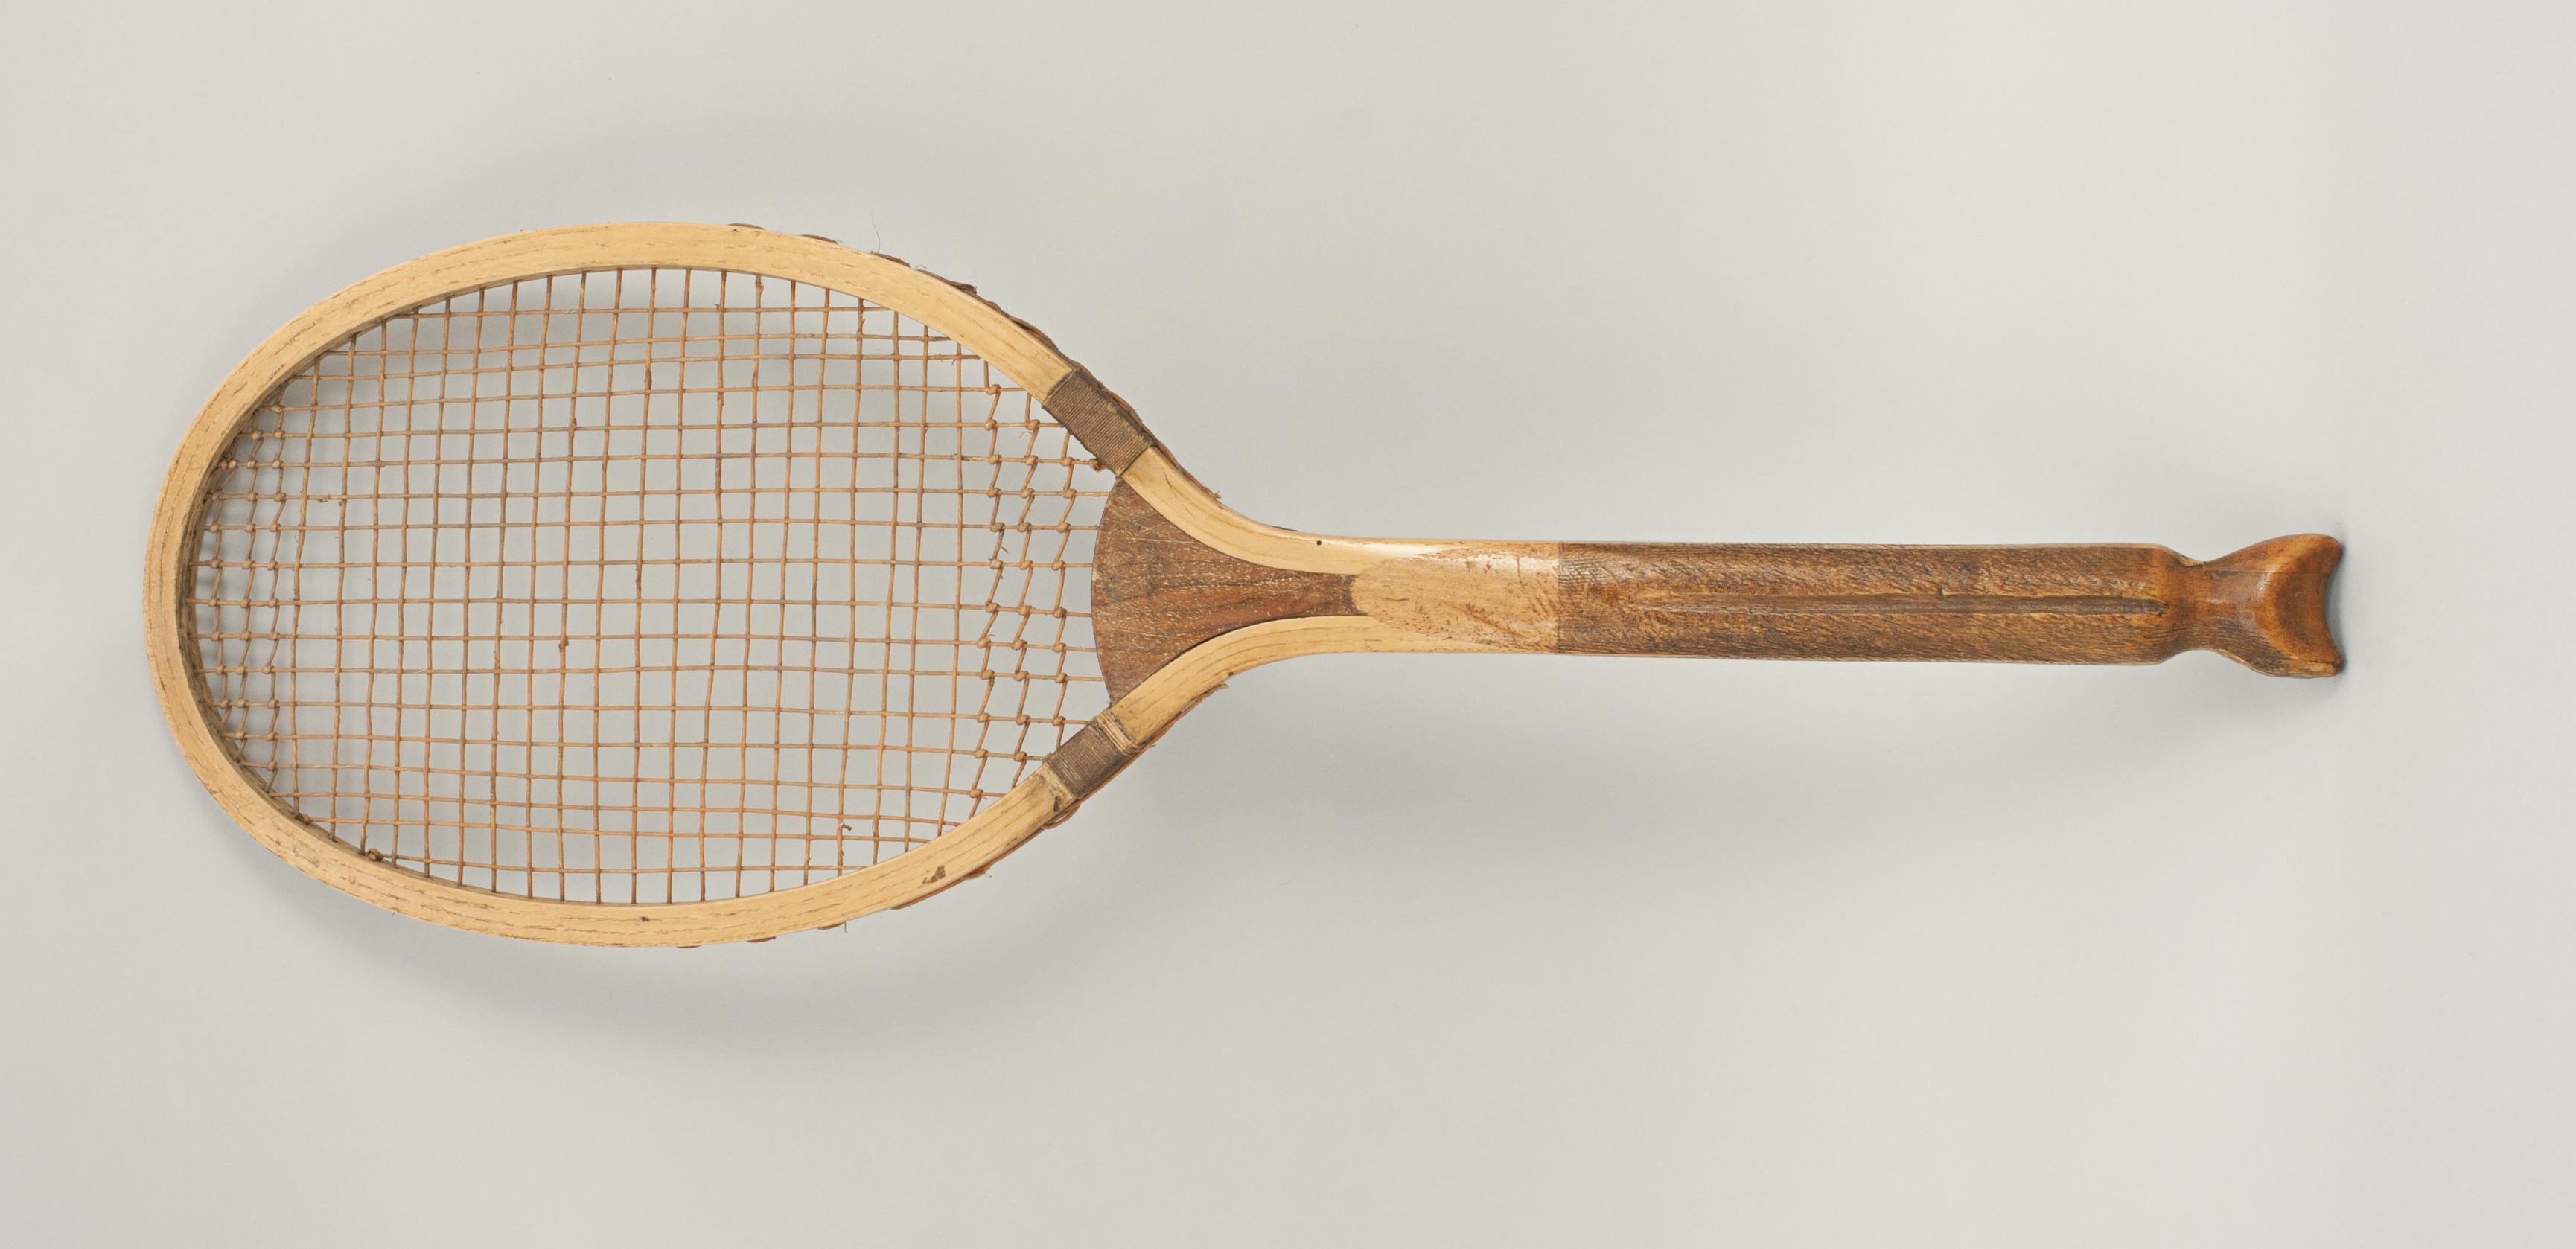 Vintage fish tail lawn tennis racket.
A Fine example of a wooden framed lawn tennis racket with nice clean ash frame and a walnut convex wedge. It has a good straight frame with a nice shaped fishtail handle, the handle with a deep central groove